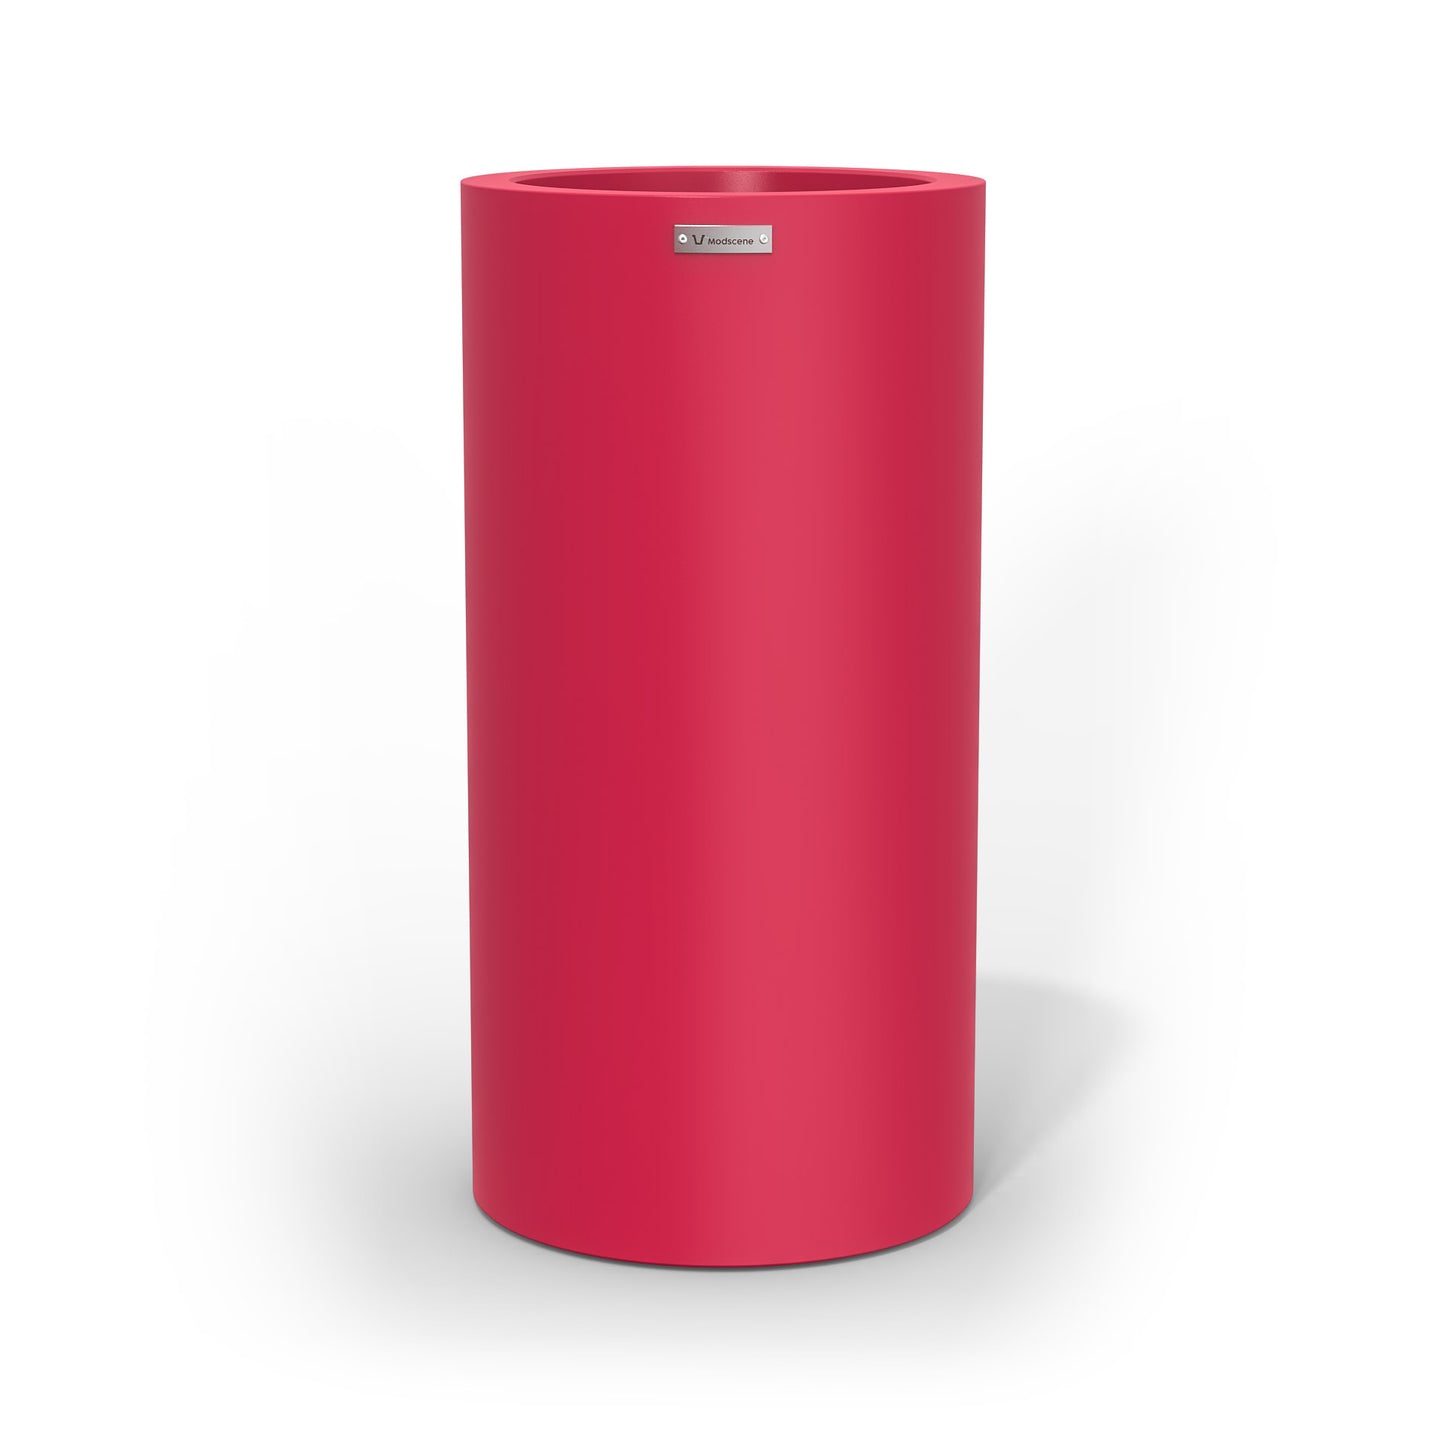 A large cigar cylinder pot planter in a pink colour. This planter is made by Modscene NZ.